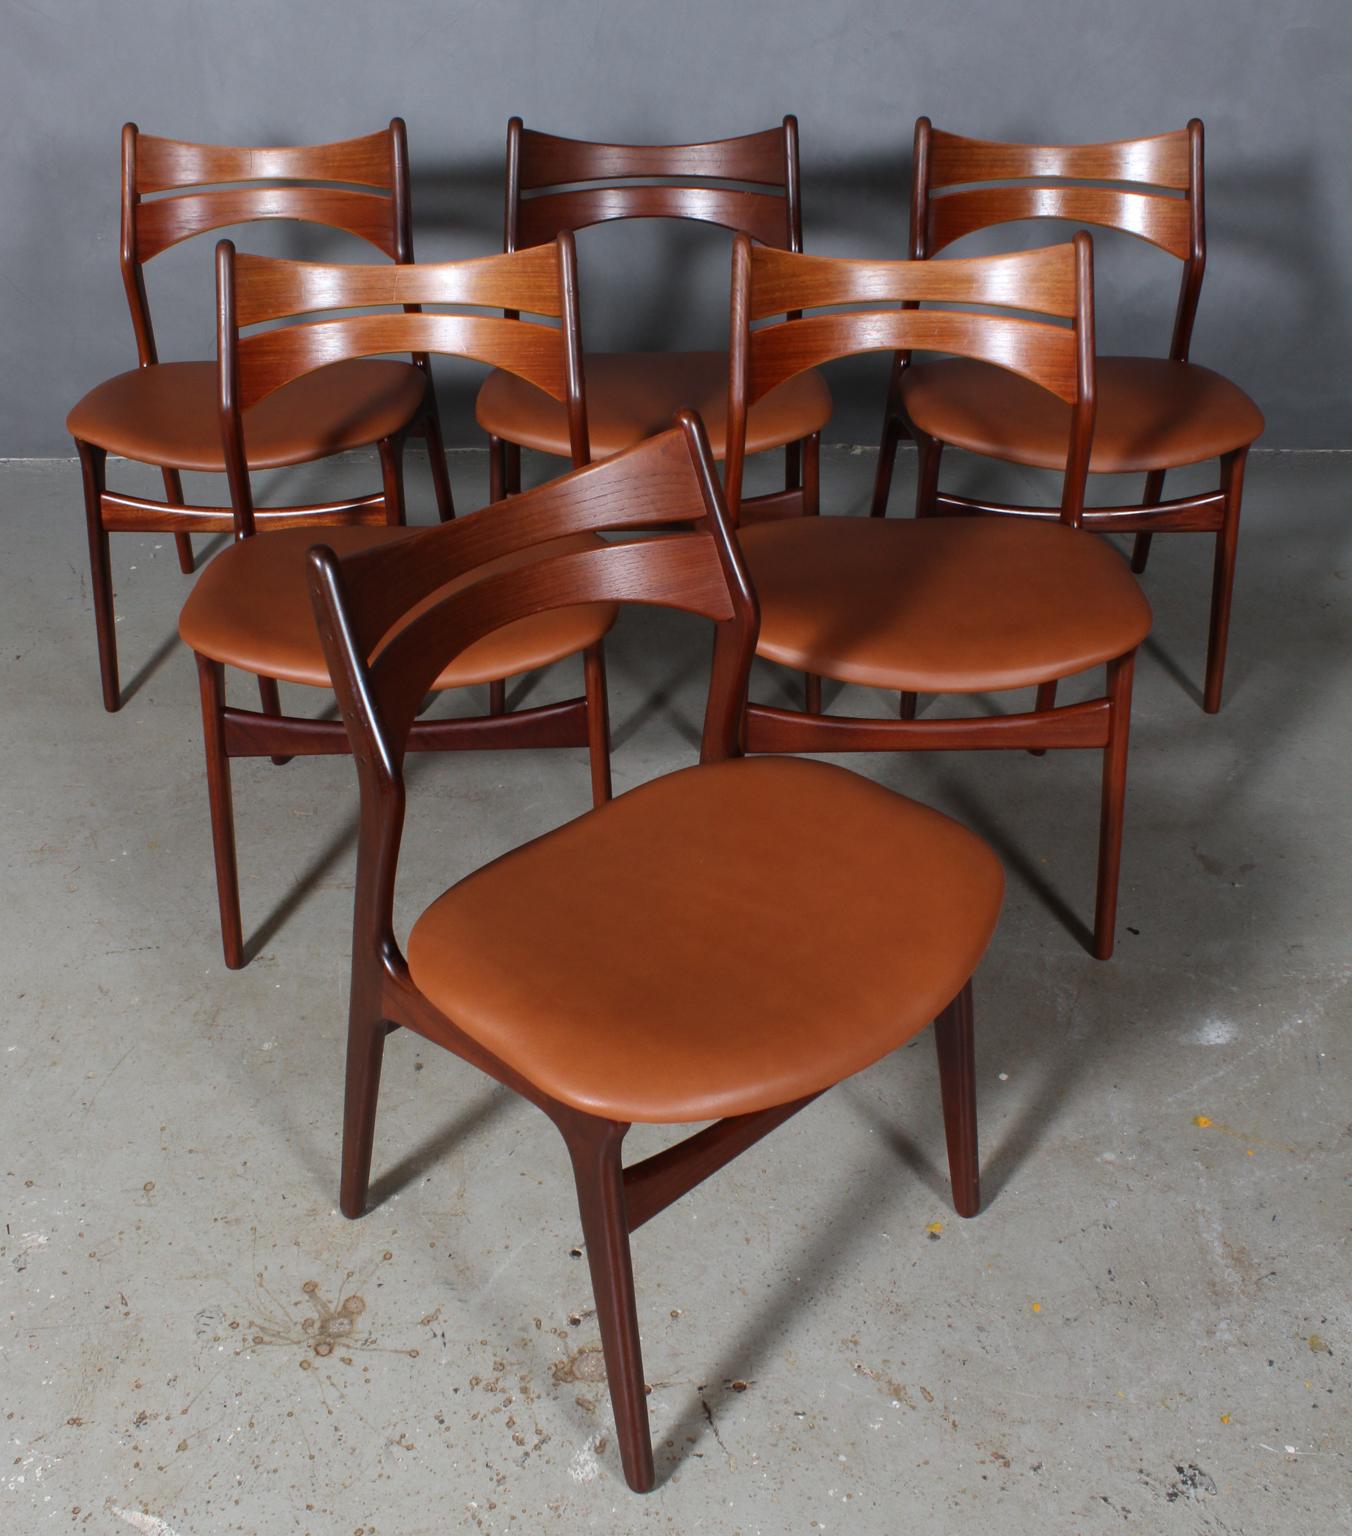 Six Eric Buch chairs with frame of partly solid teak.

New upholstered with tan aniline leather. 

Model 310, made by Chr Christensens Møbelfabrik, Denmark.